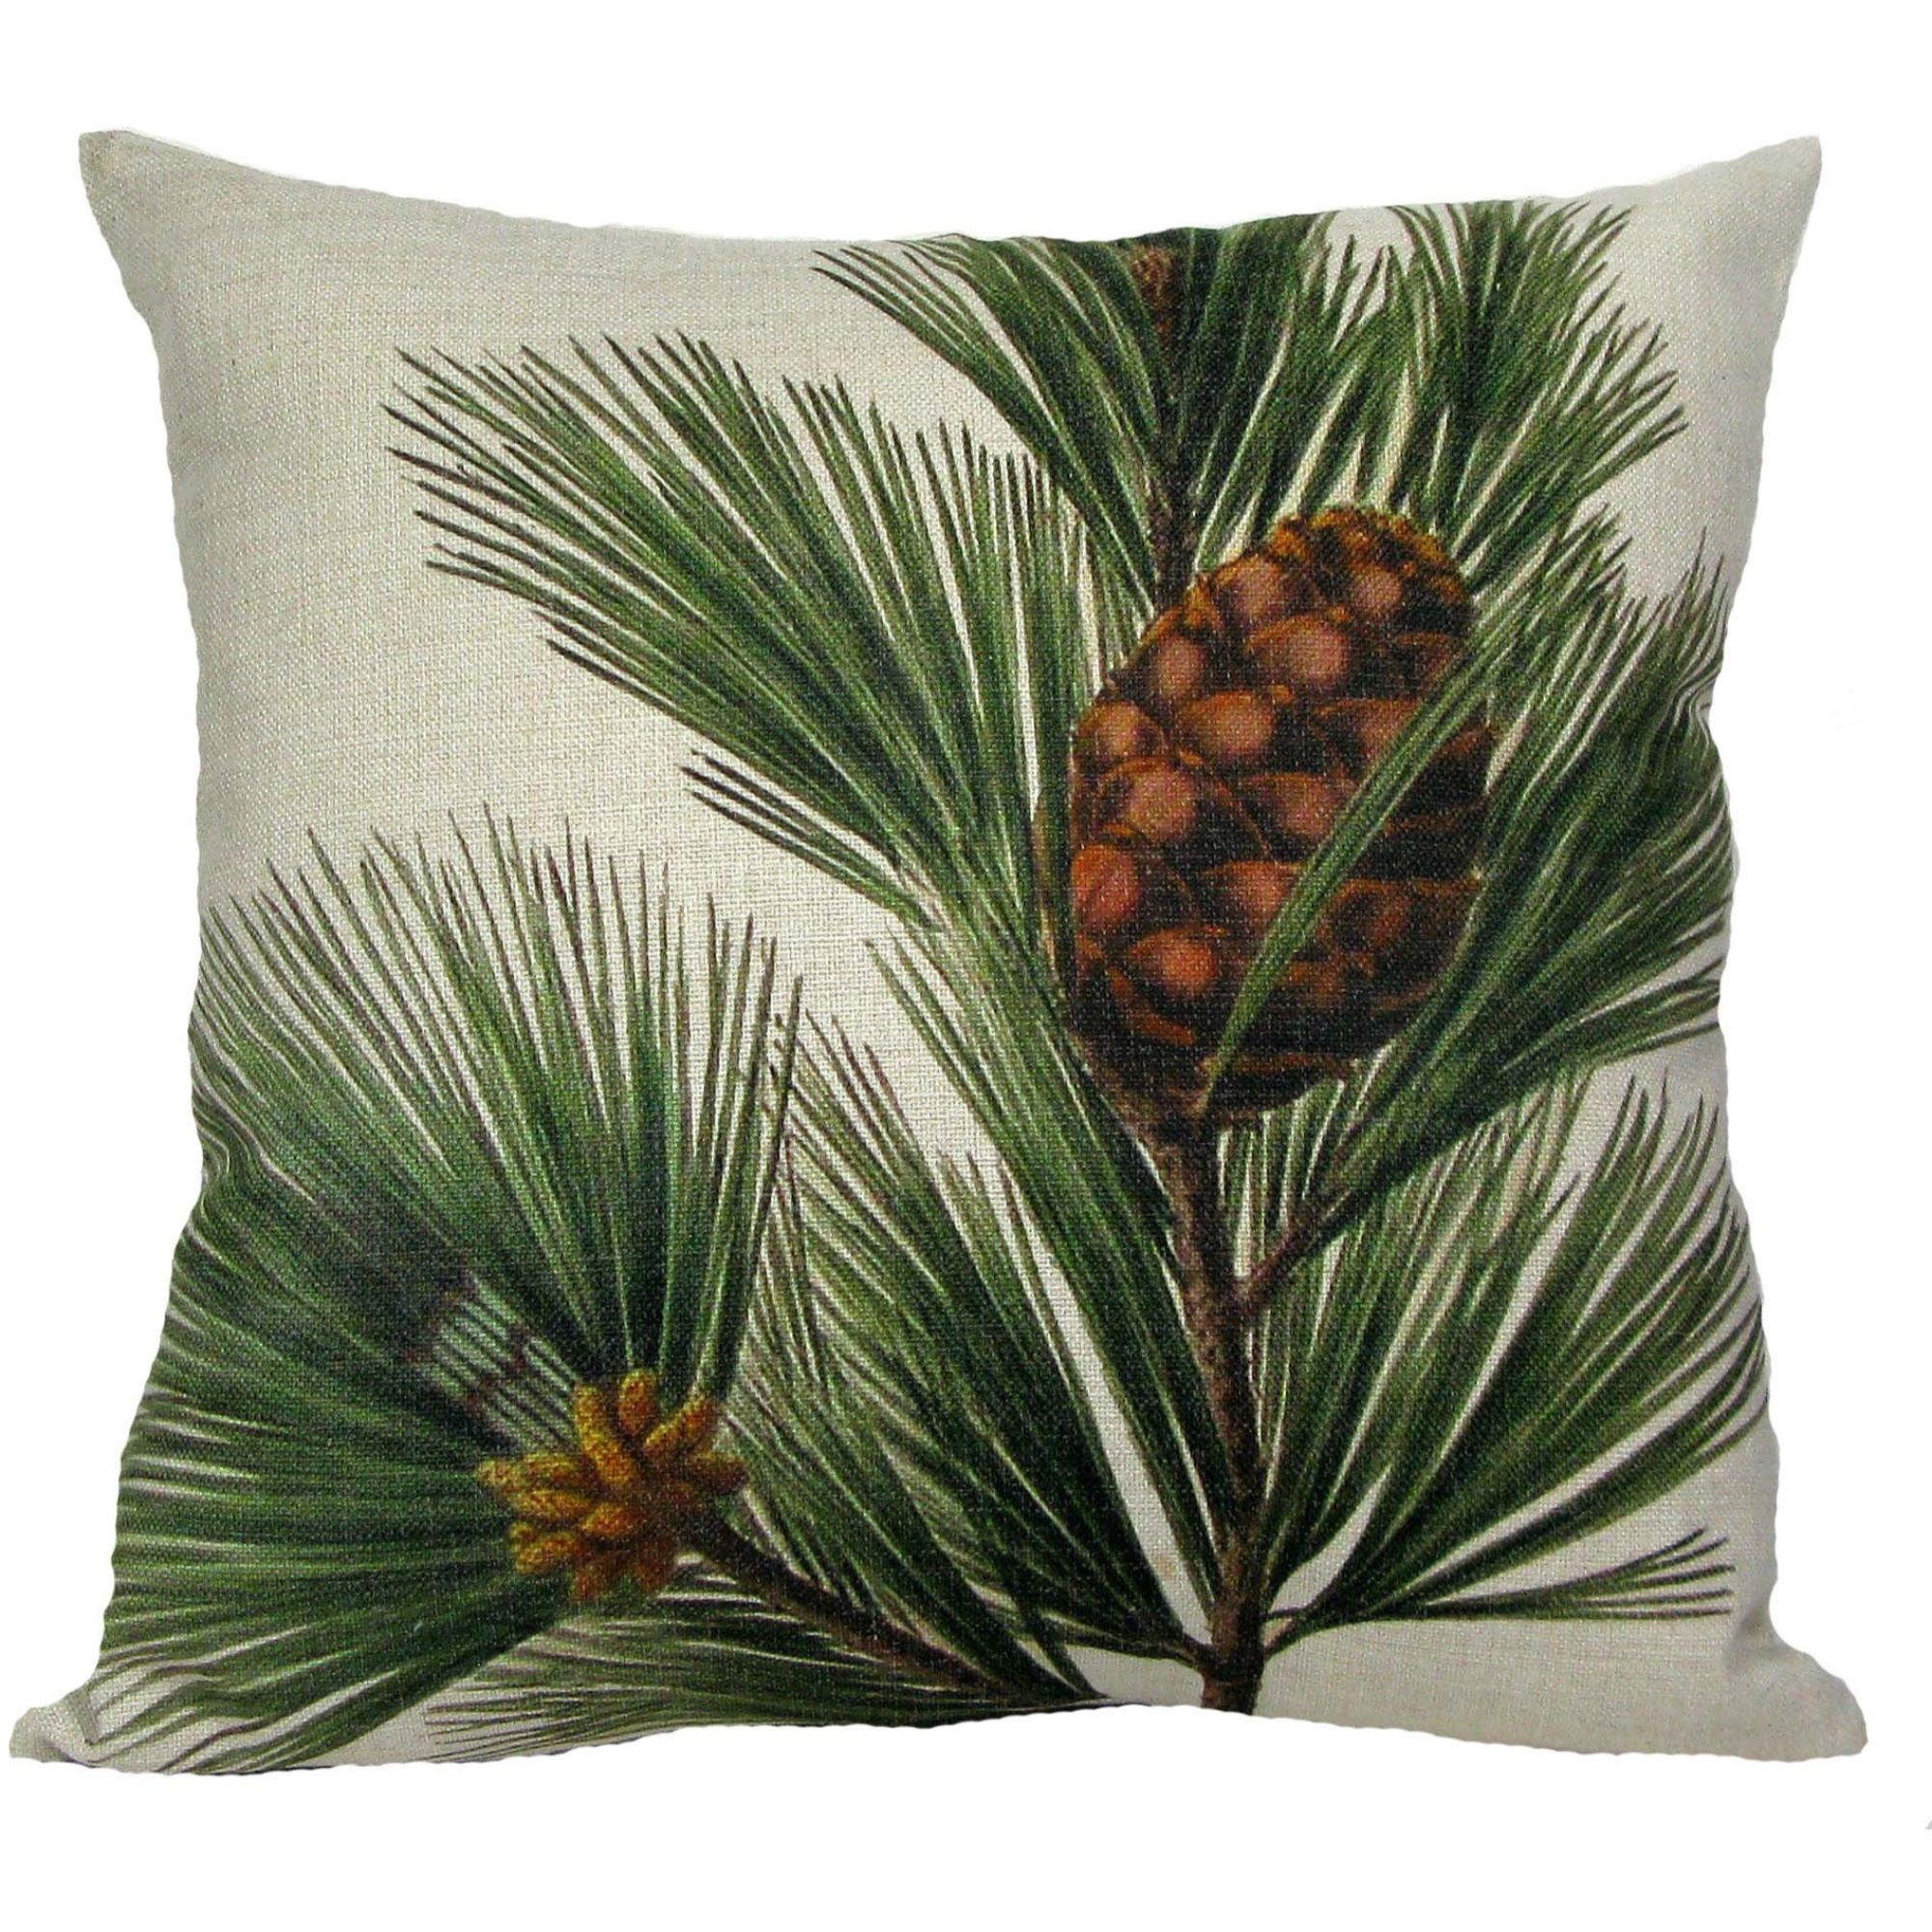 Golden Hill Studio 18" Green Pine Cone and Bough Square Christmas Throw Pillow Cover